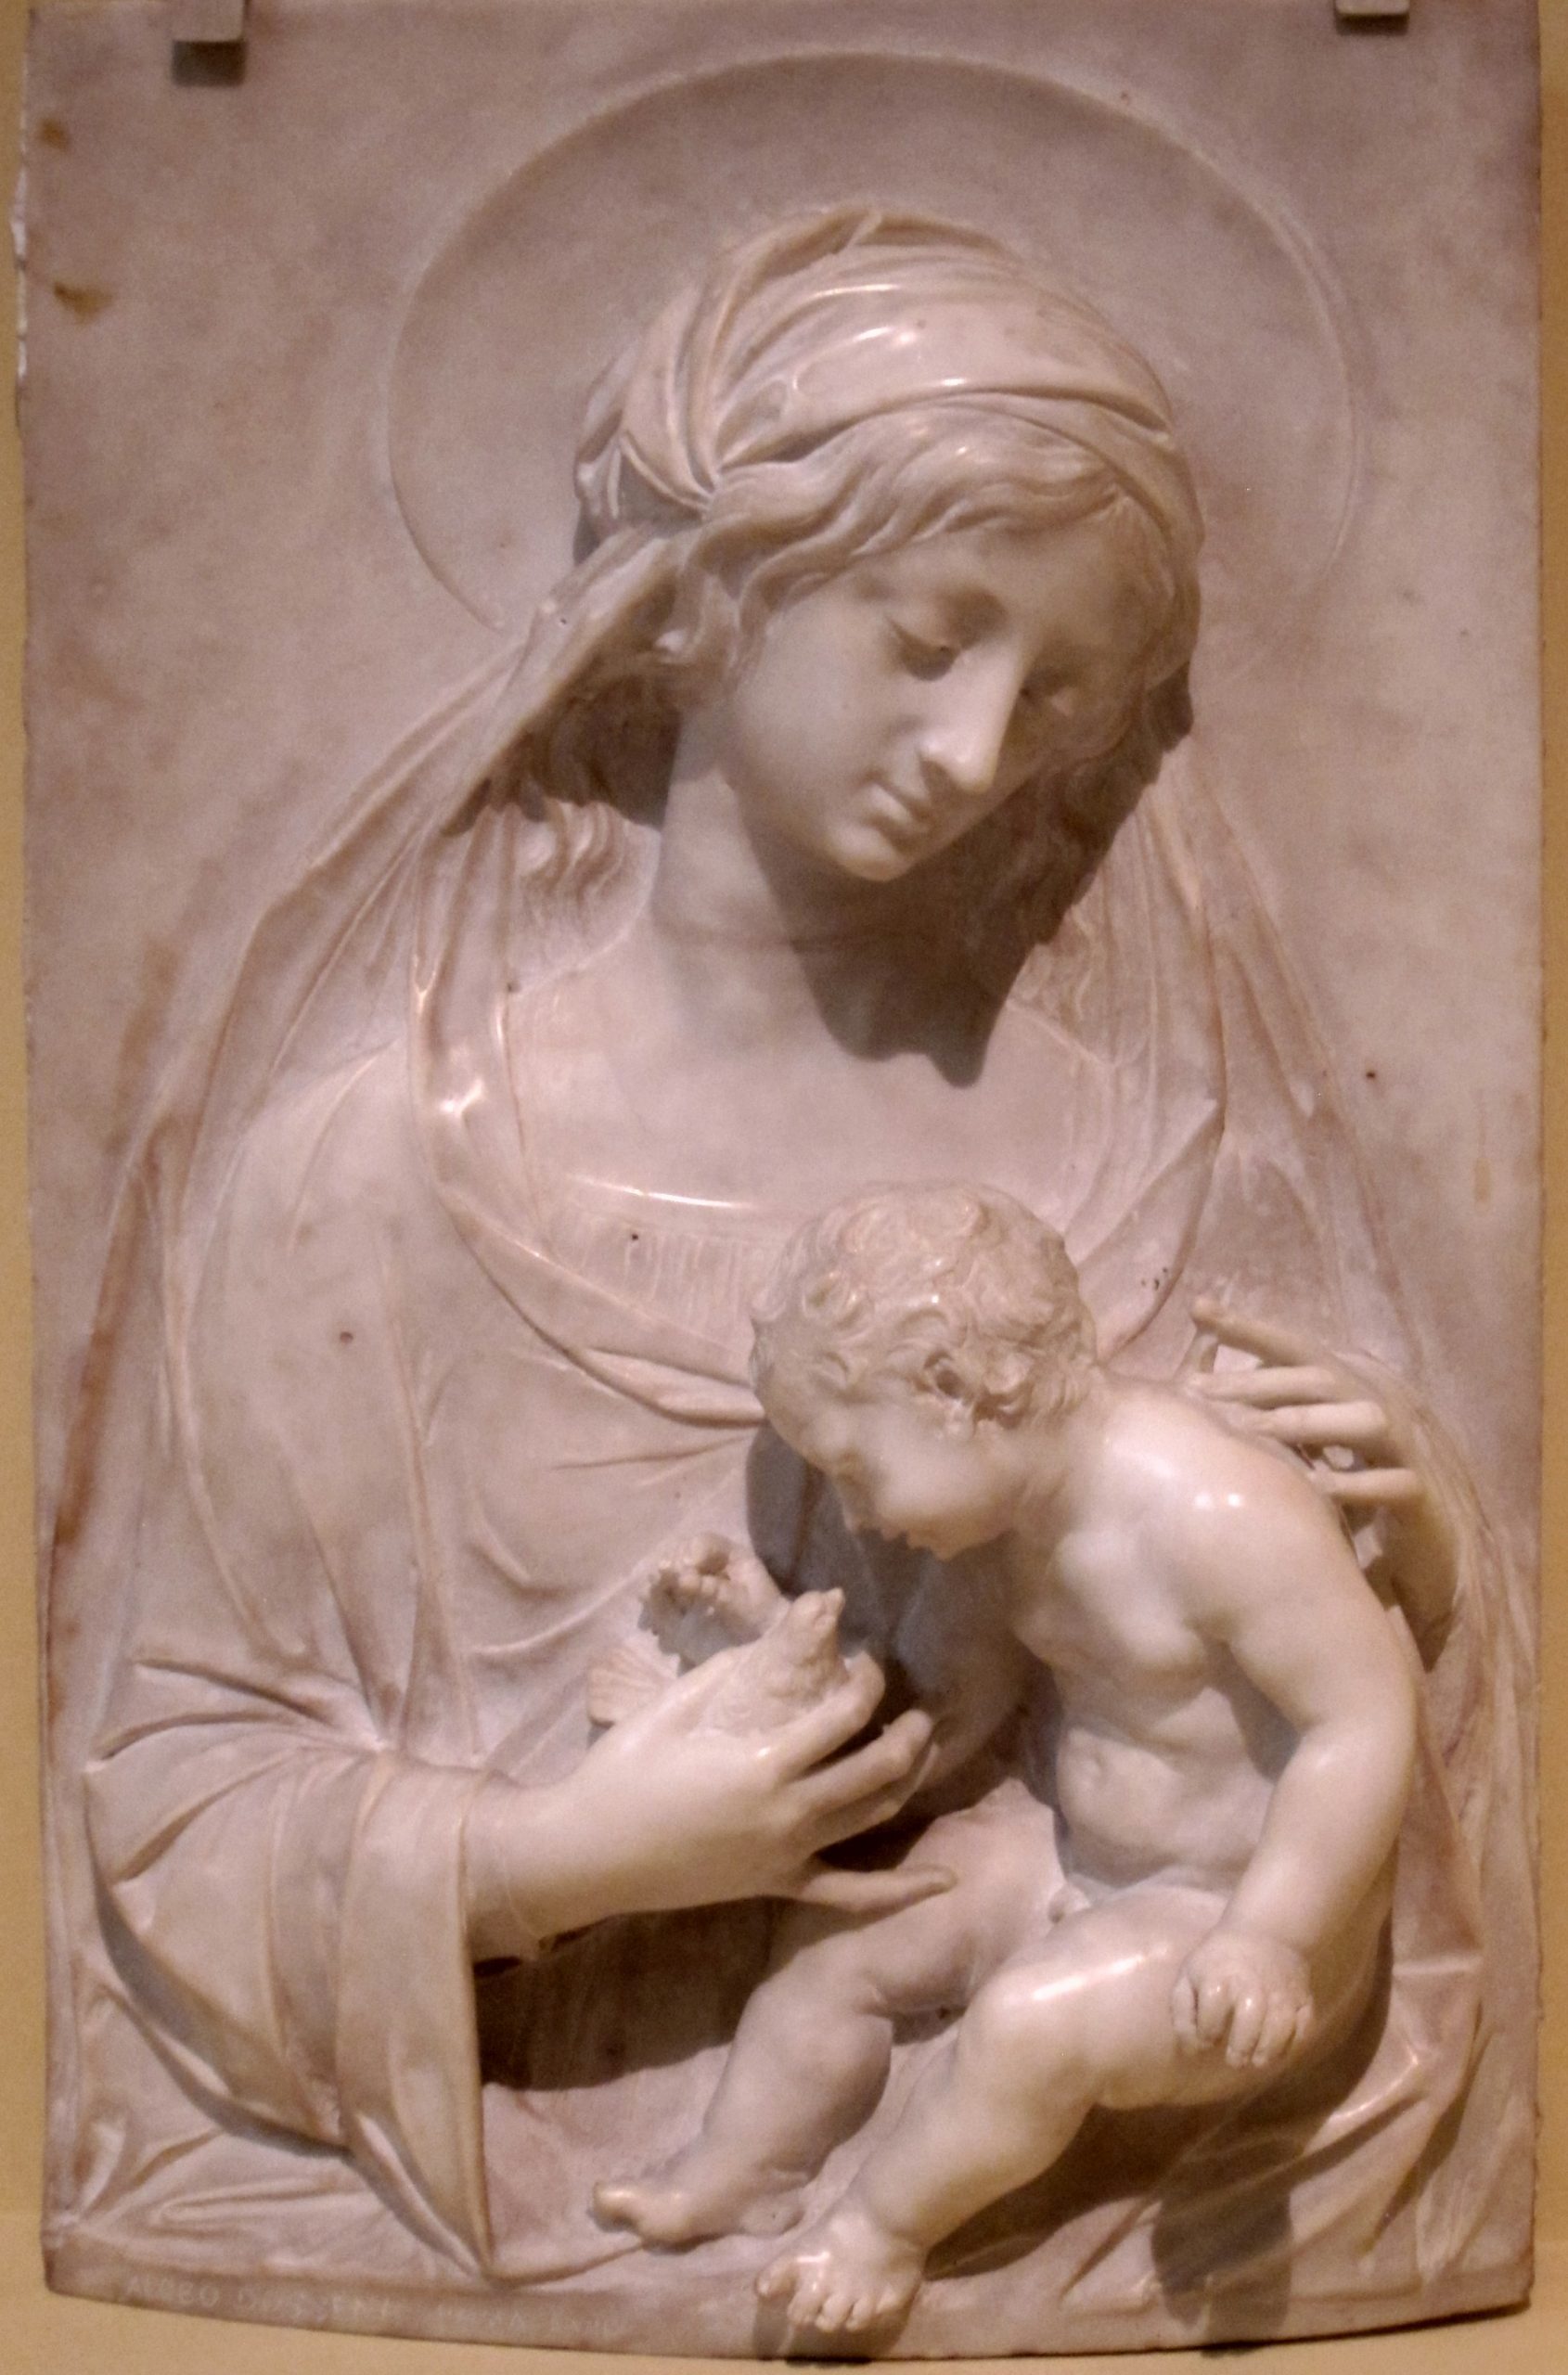 The image is a marble relief depicting the Virgin Mary holding a baby in her lap. The Virgin Mary is depicted with a serene expression and is dressed in a long flowing robe. The baby in her lap is depicted as a small, naked infant. The background of the relief is blank, with no other elements visible.